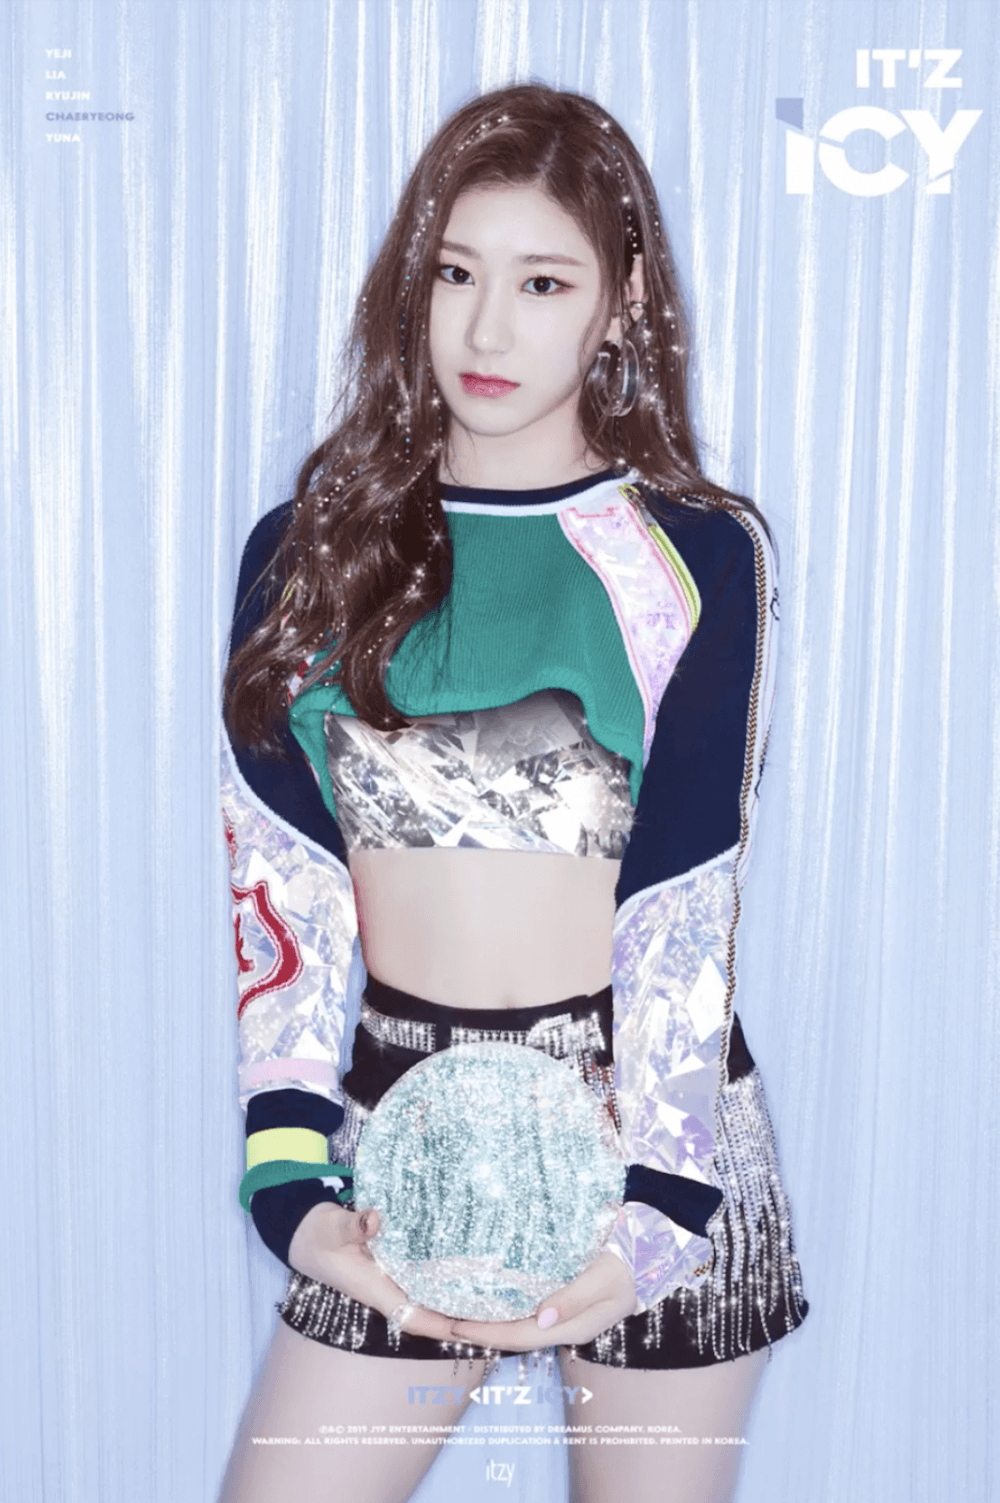 Chaeryeong sports brunette hair in teaser image for 'IT'Z ICY